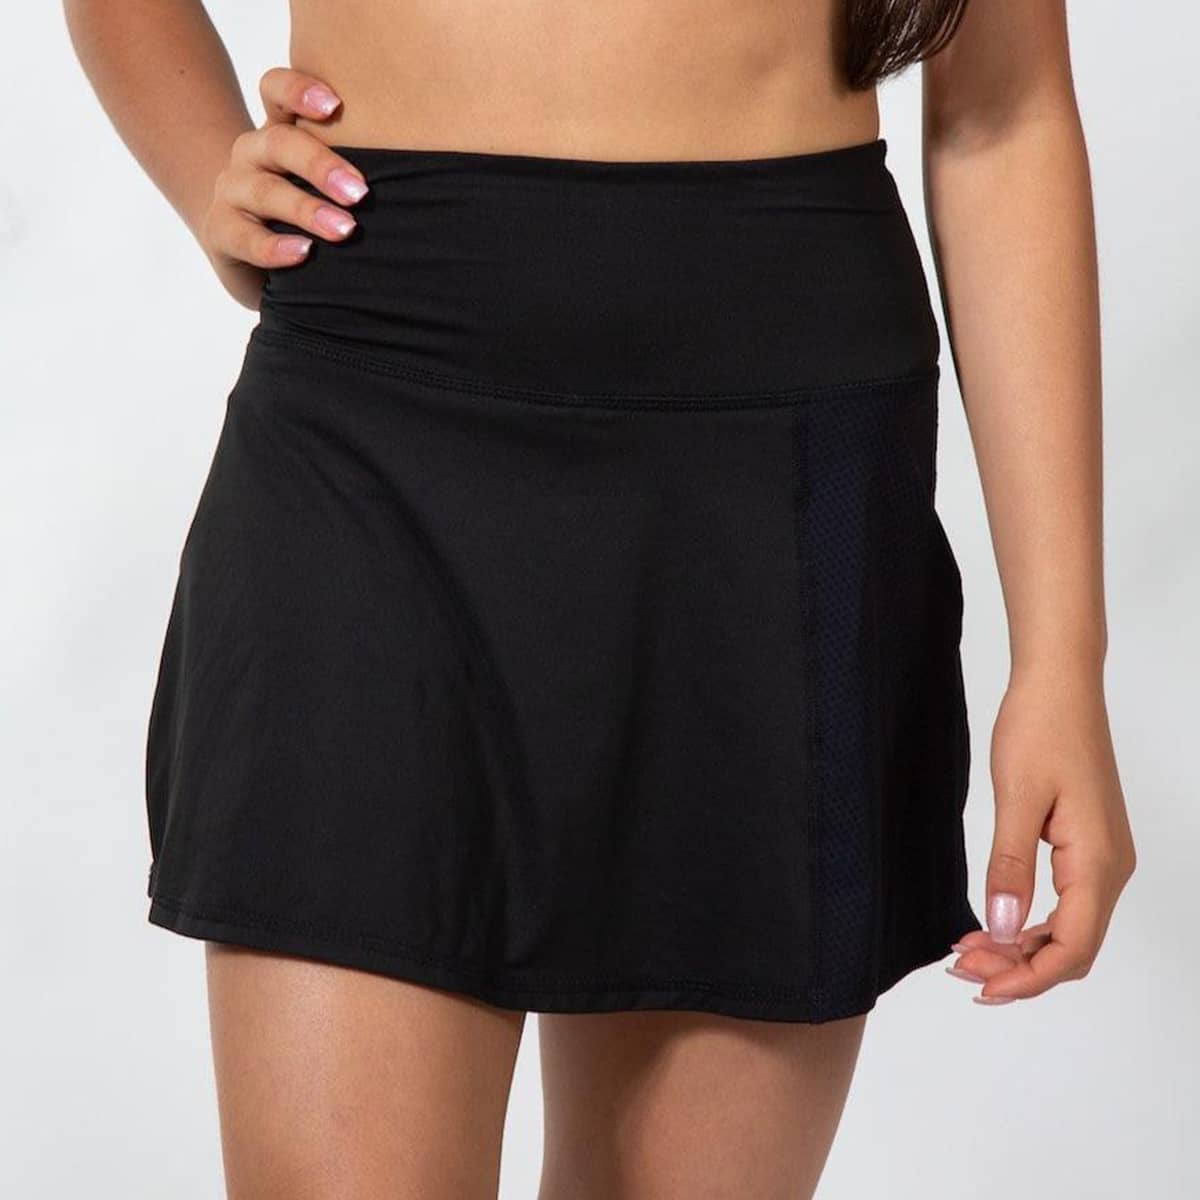 close up  front image of the skort, showing the high waist and black front flap